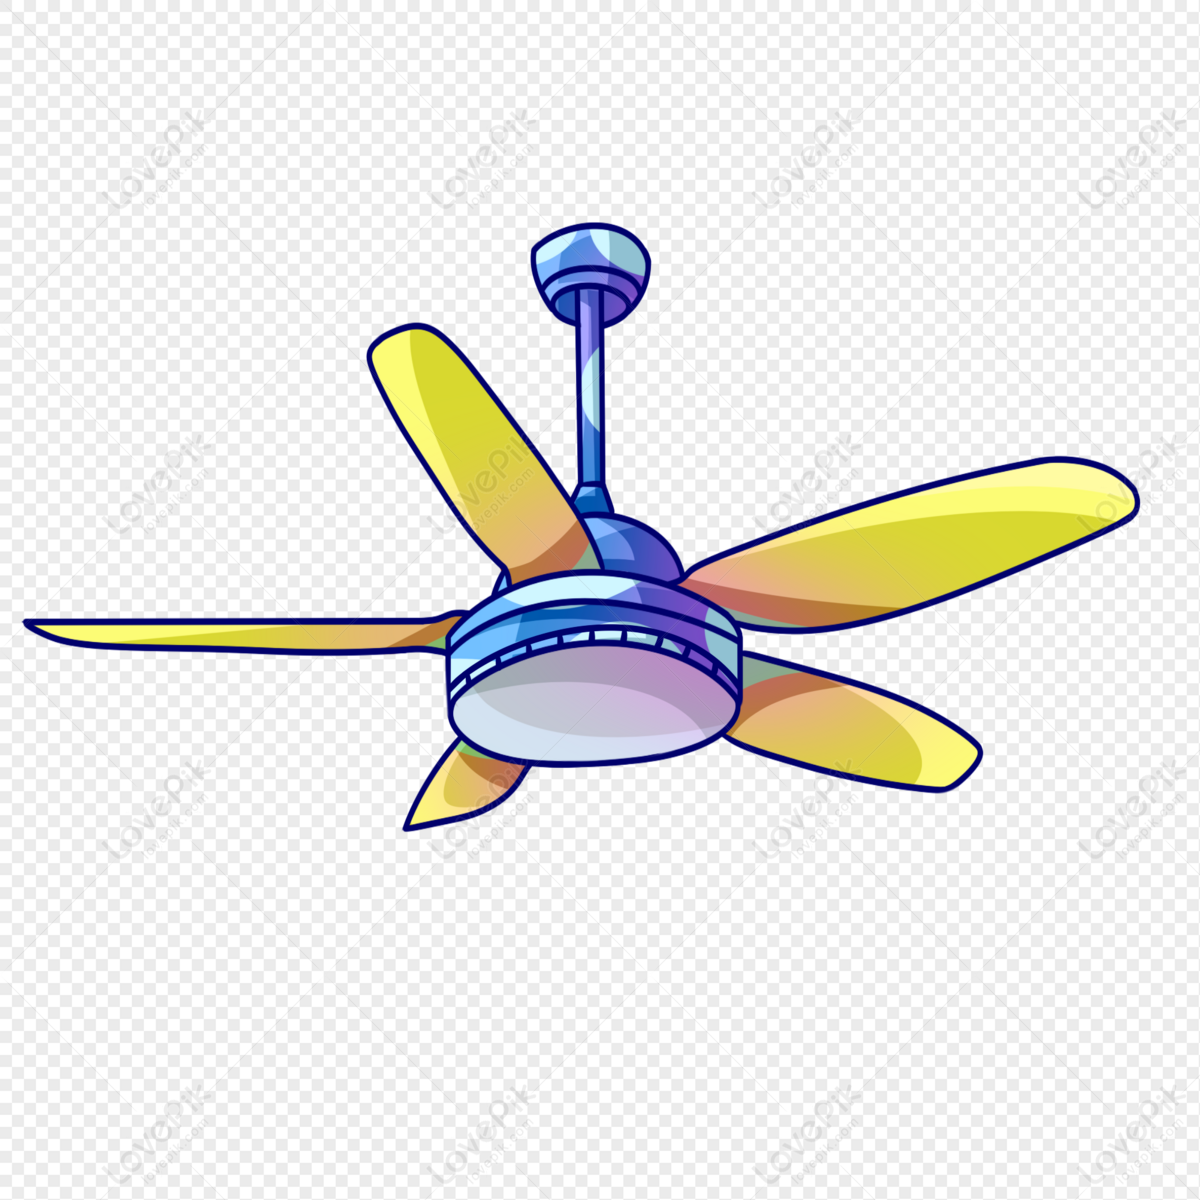 Cartoon A Fan PNG Image Free Download And Clipart Image For Free Download -  Lovepik | 401557881